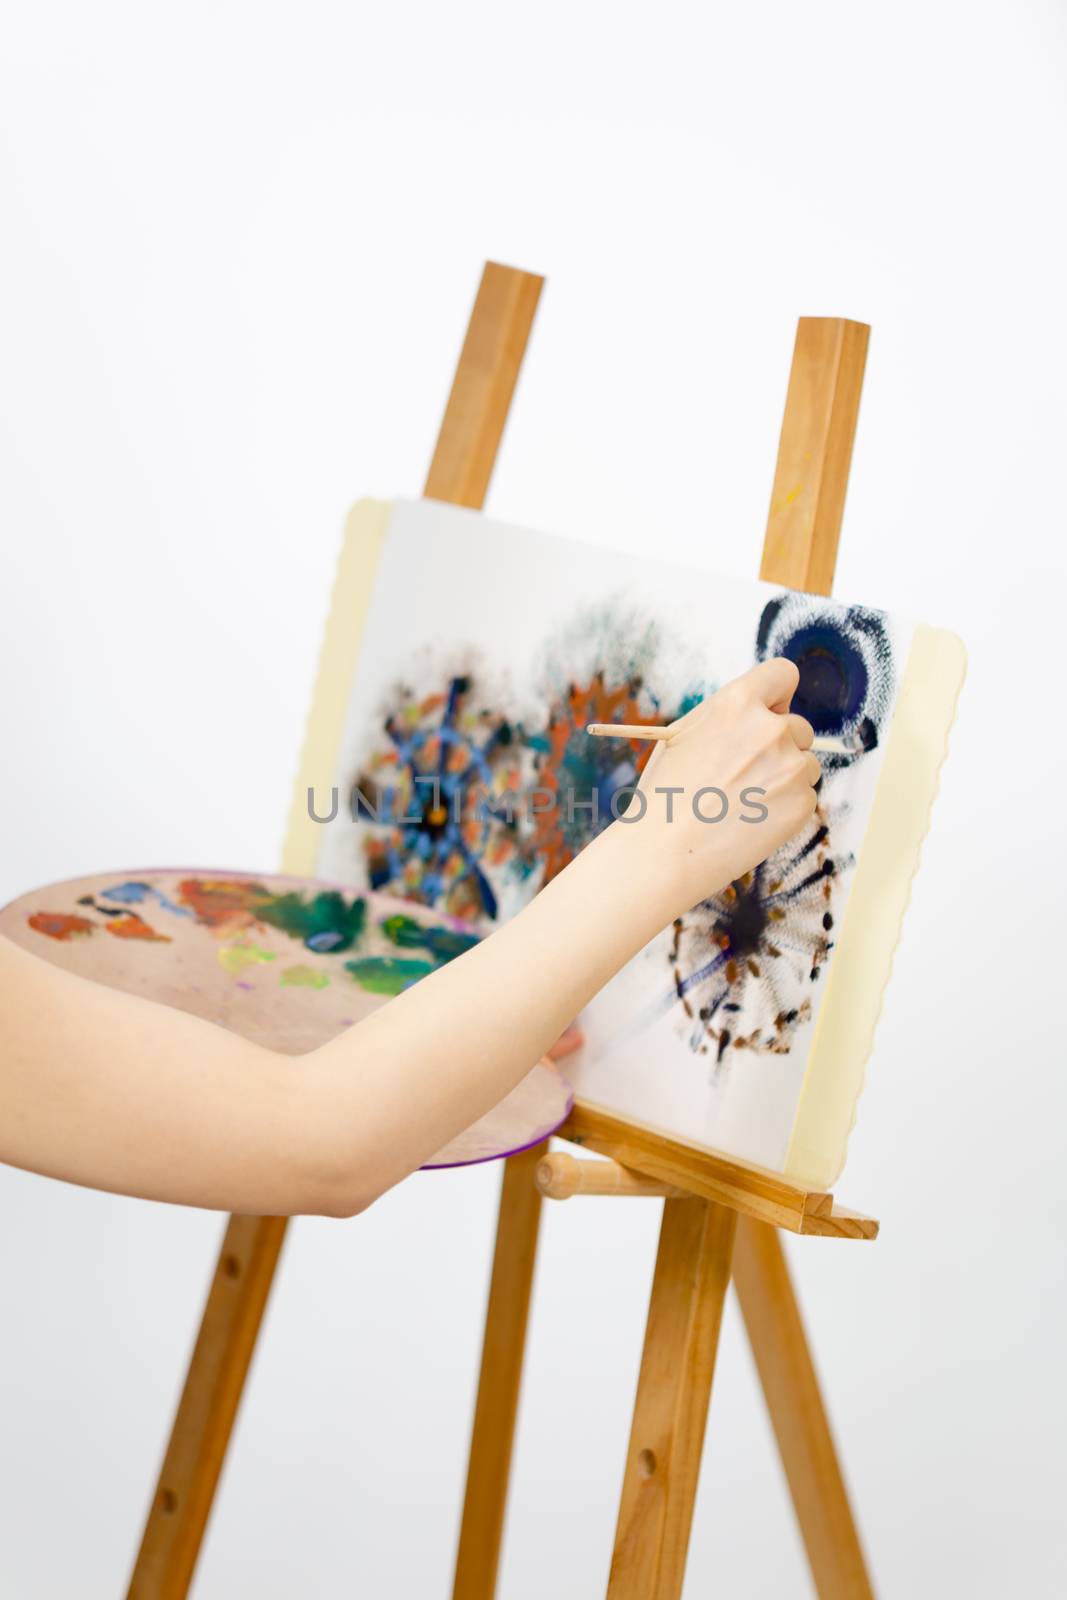 Artist painting on an easel by imagesbykenny